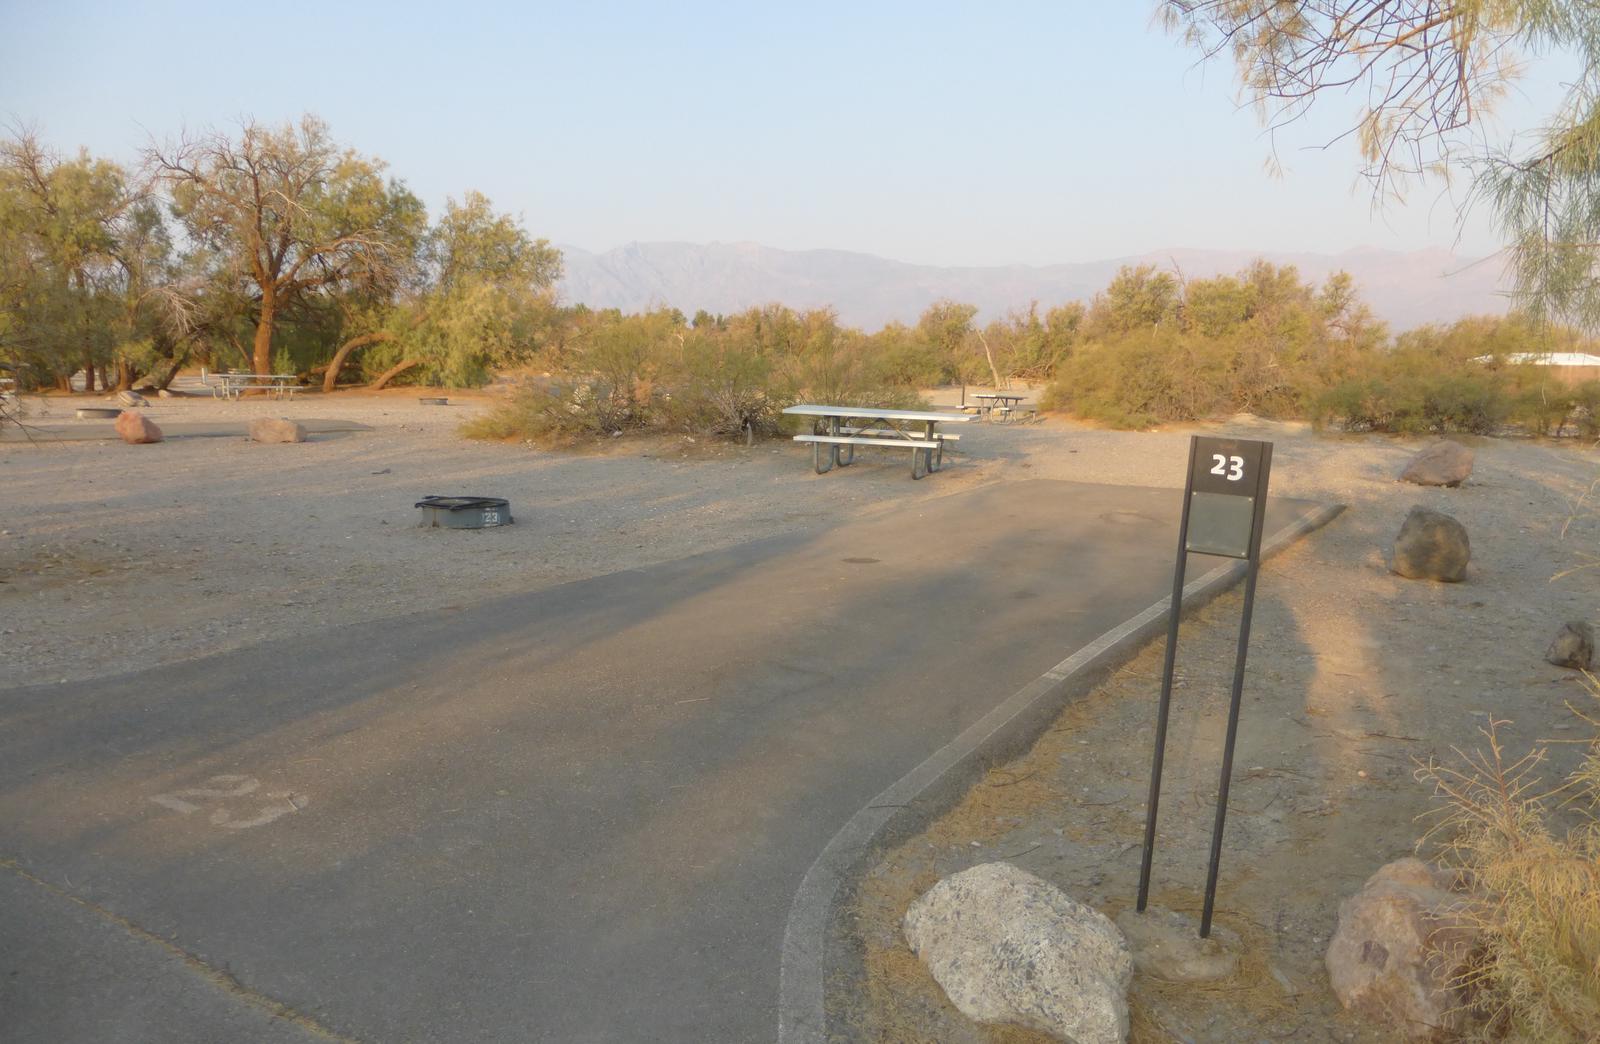 Furnace Creek Campground standard nonelectric site #23 with picnic table and fire ring.